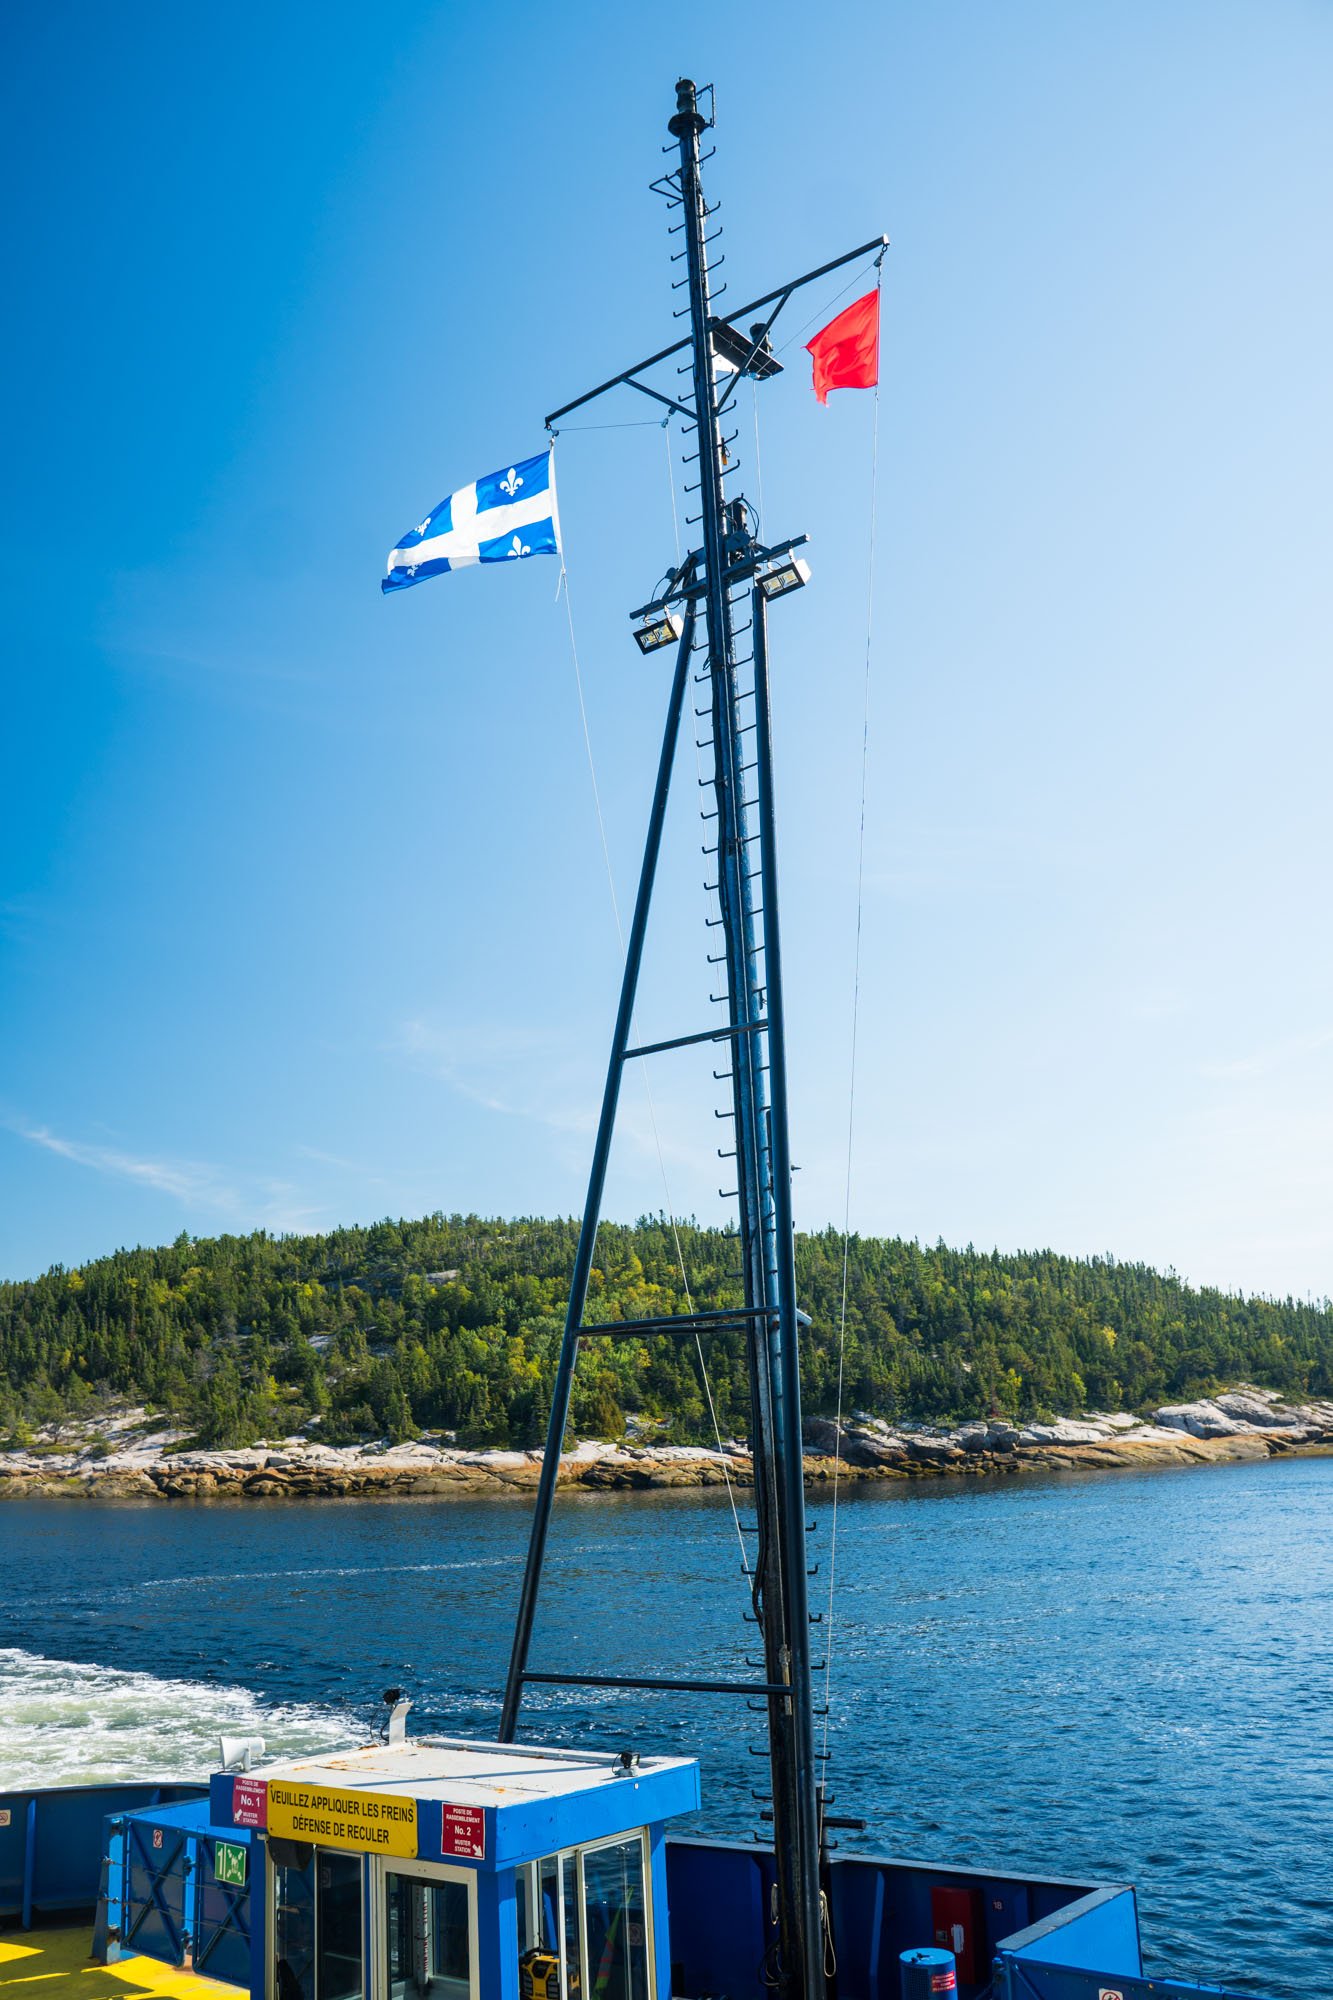  Ferry crossing of the Saguenay river in Tadoussac, Quebec 